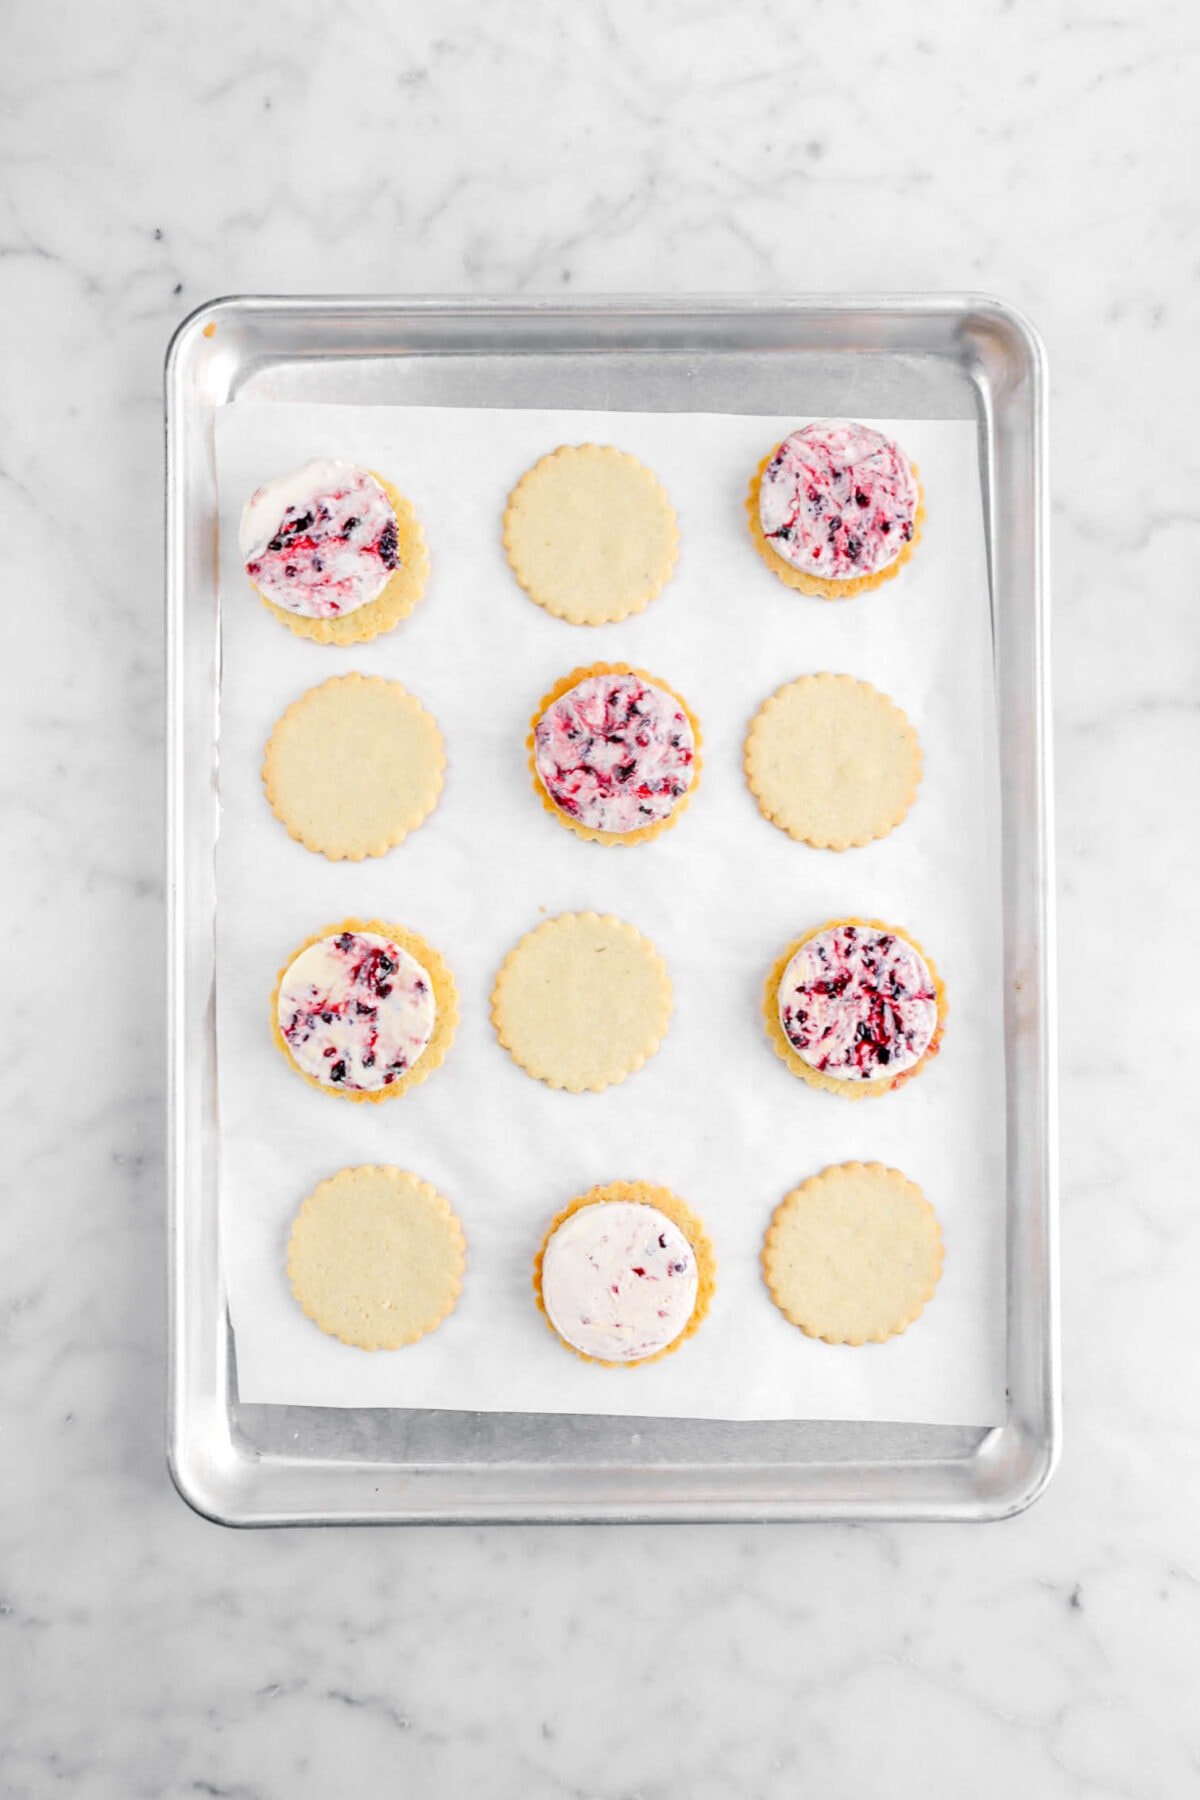 six circles of ice cream on top of six upside down cookies with six other cookies beside.